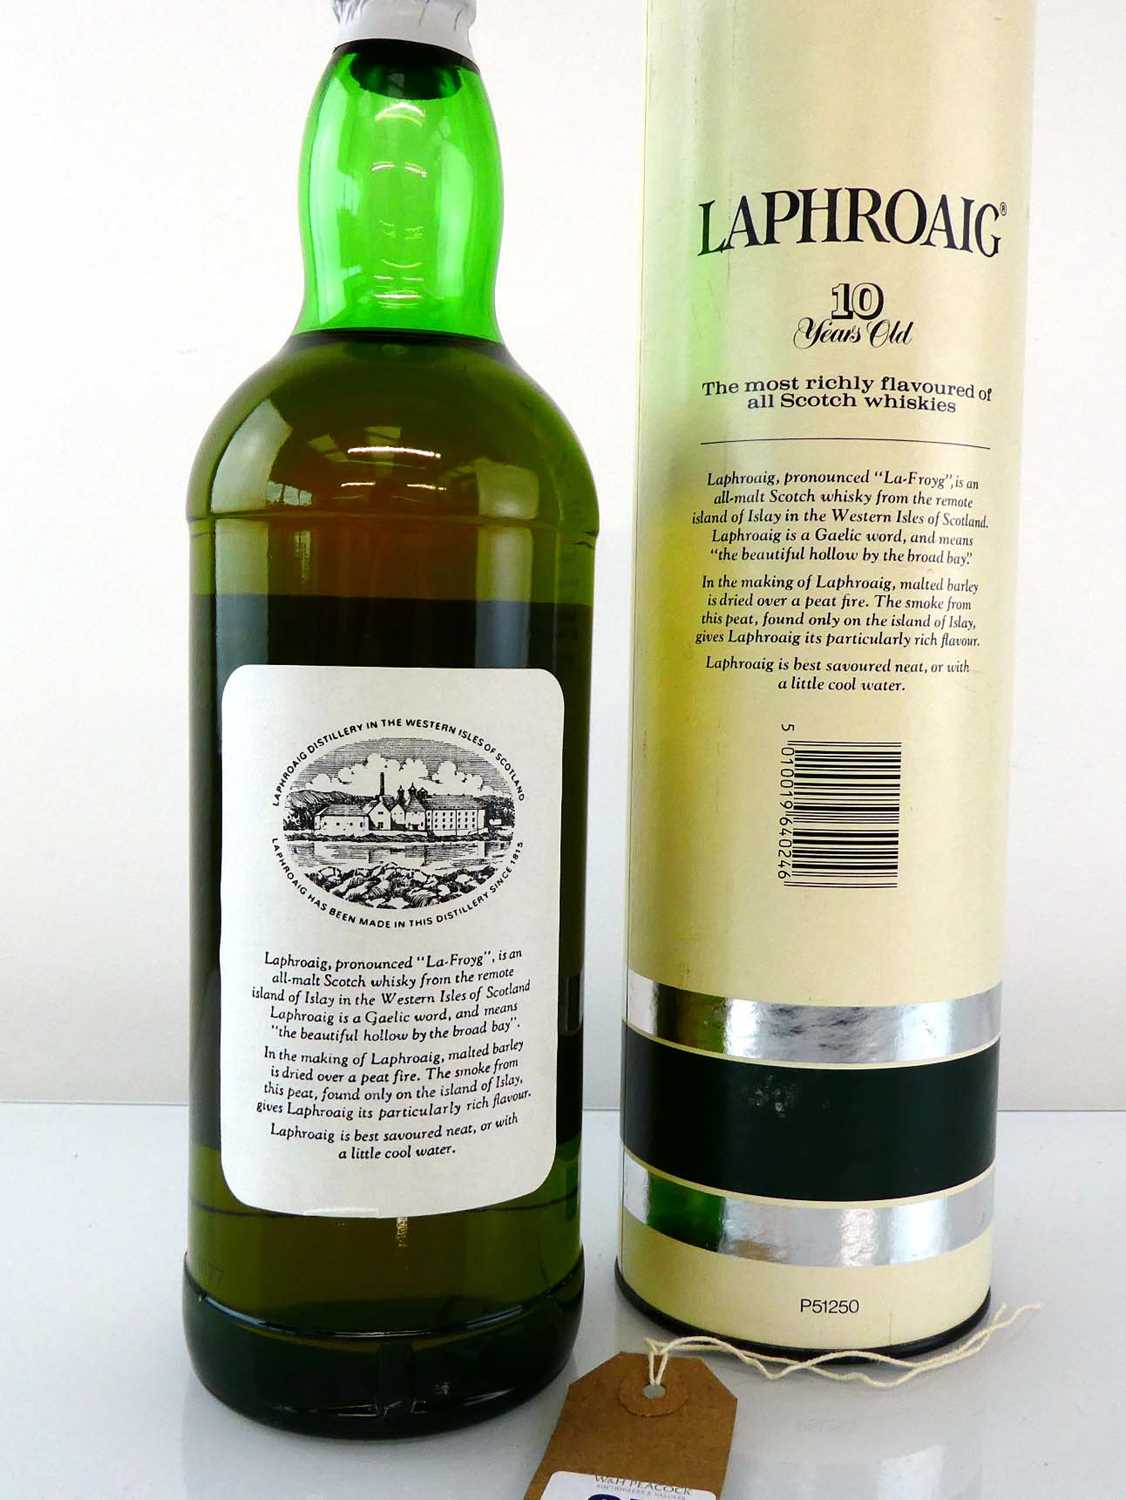 A bottle of Laphroaig 10 year old Islay Single Malt Scotch Whisky Pre Royal Warrant with carton 1 - Image 3 of 3